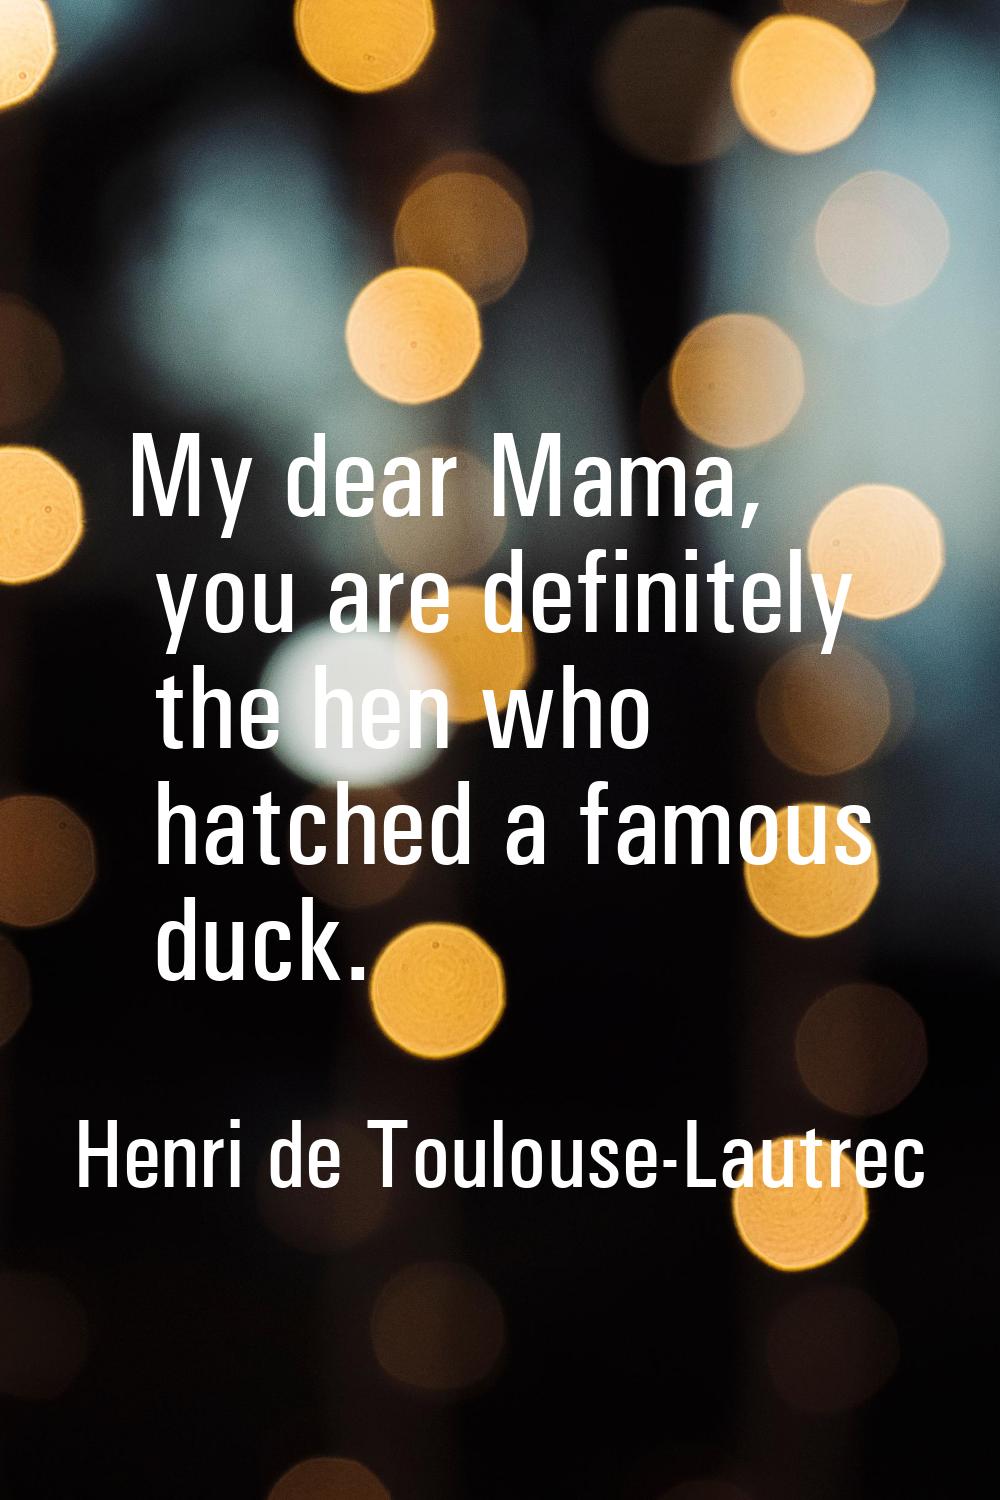 My dear Mama, you are definitely the hen who hatched a famous duck.